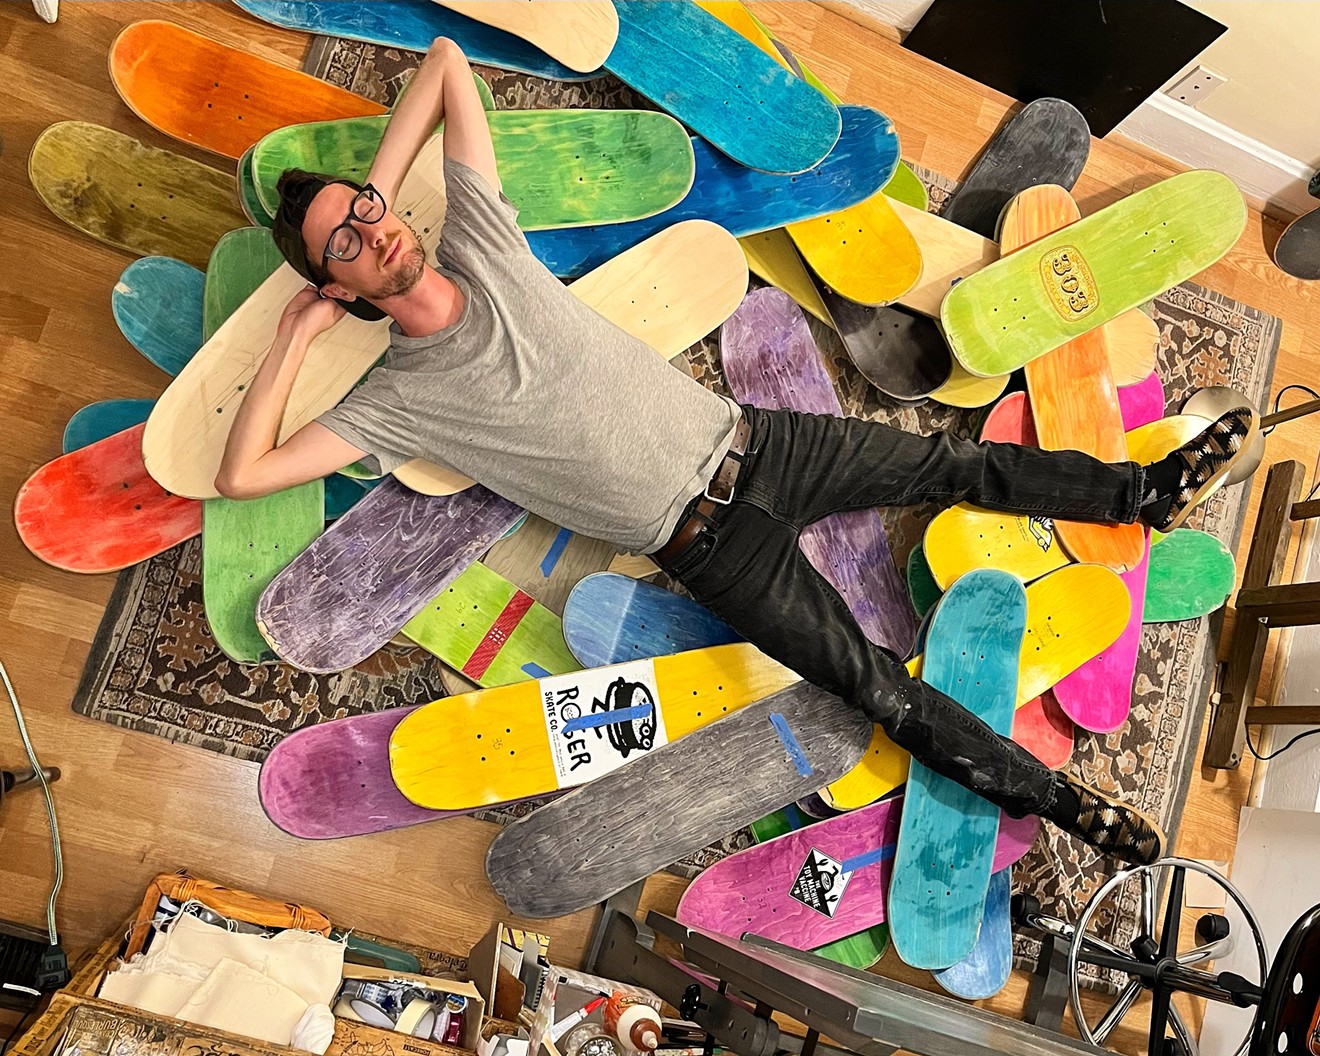 "Post processing nap": Kyle Garlock sanded each deck by hand to create the canvases for this year's event.